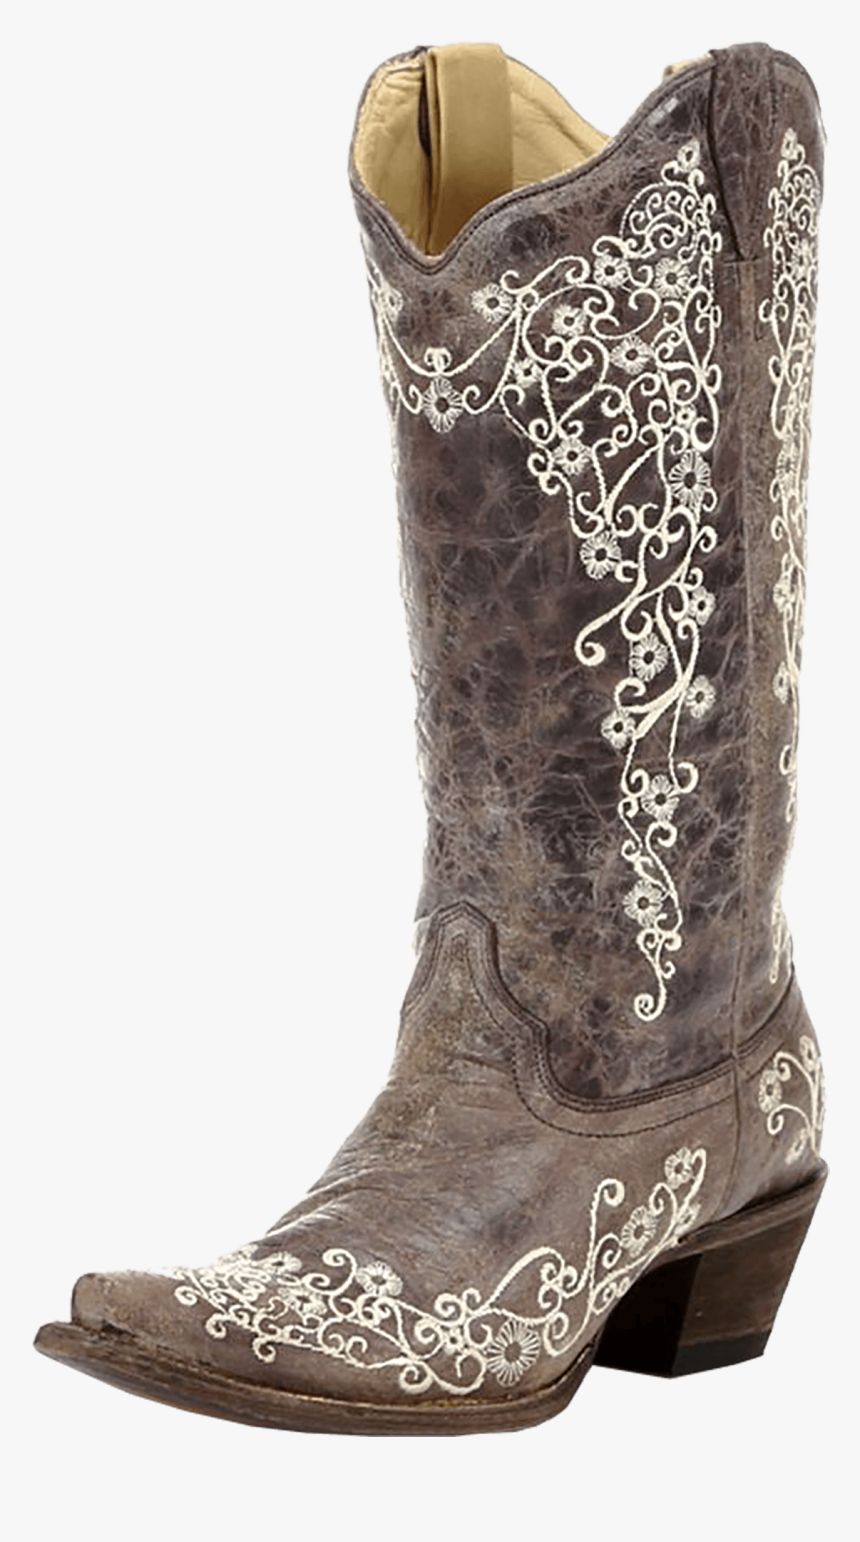 Corral Vintage Boots - Corral Wedding Boots 2018, HD Png Download, Free Download